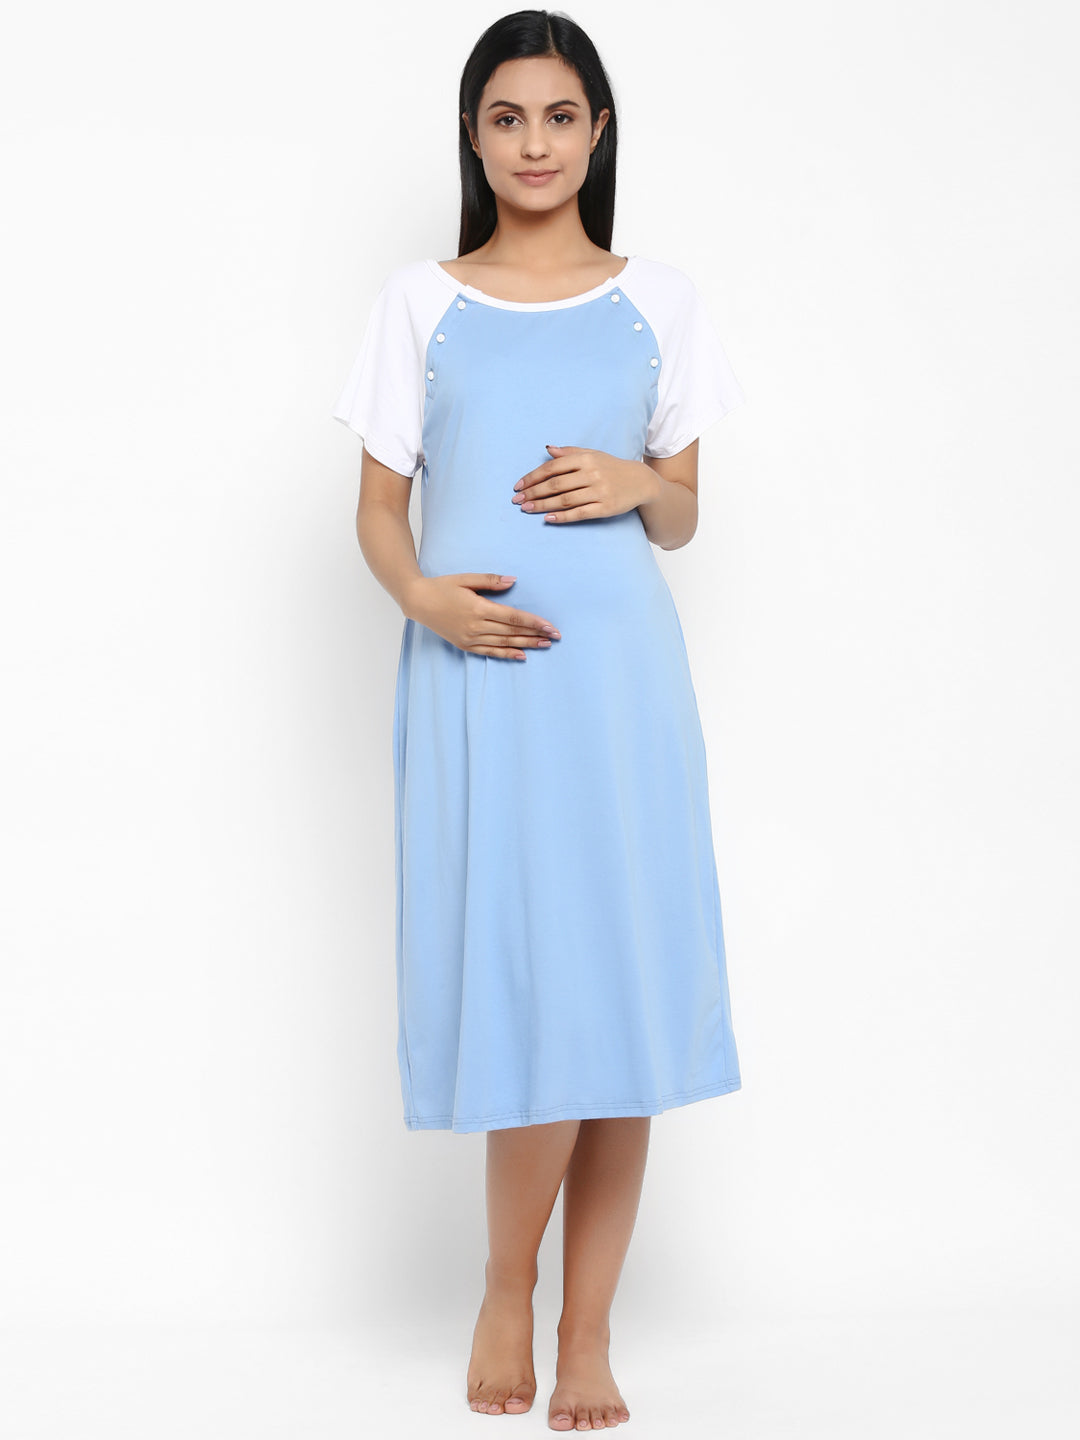 Shop Wide Range Of Maternity Nightdress Online At Great Deals